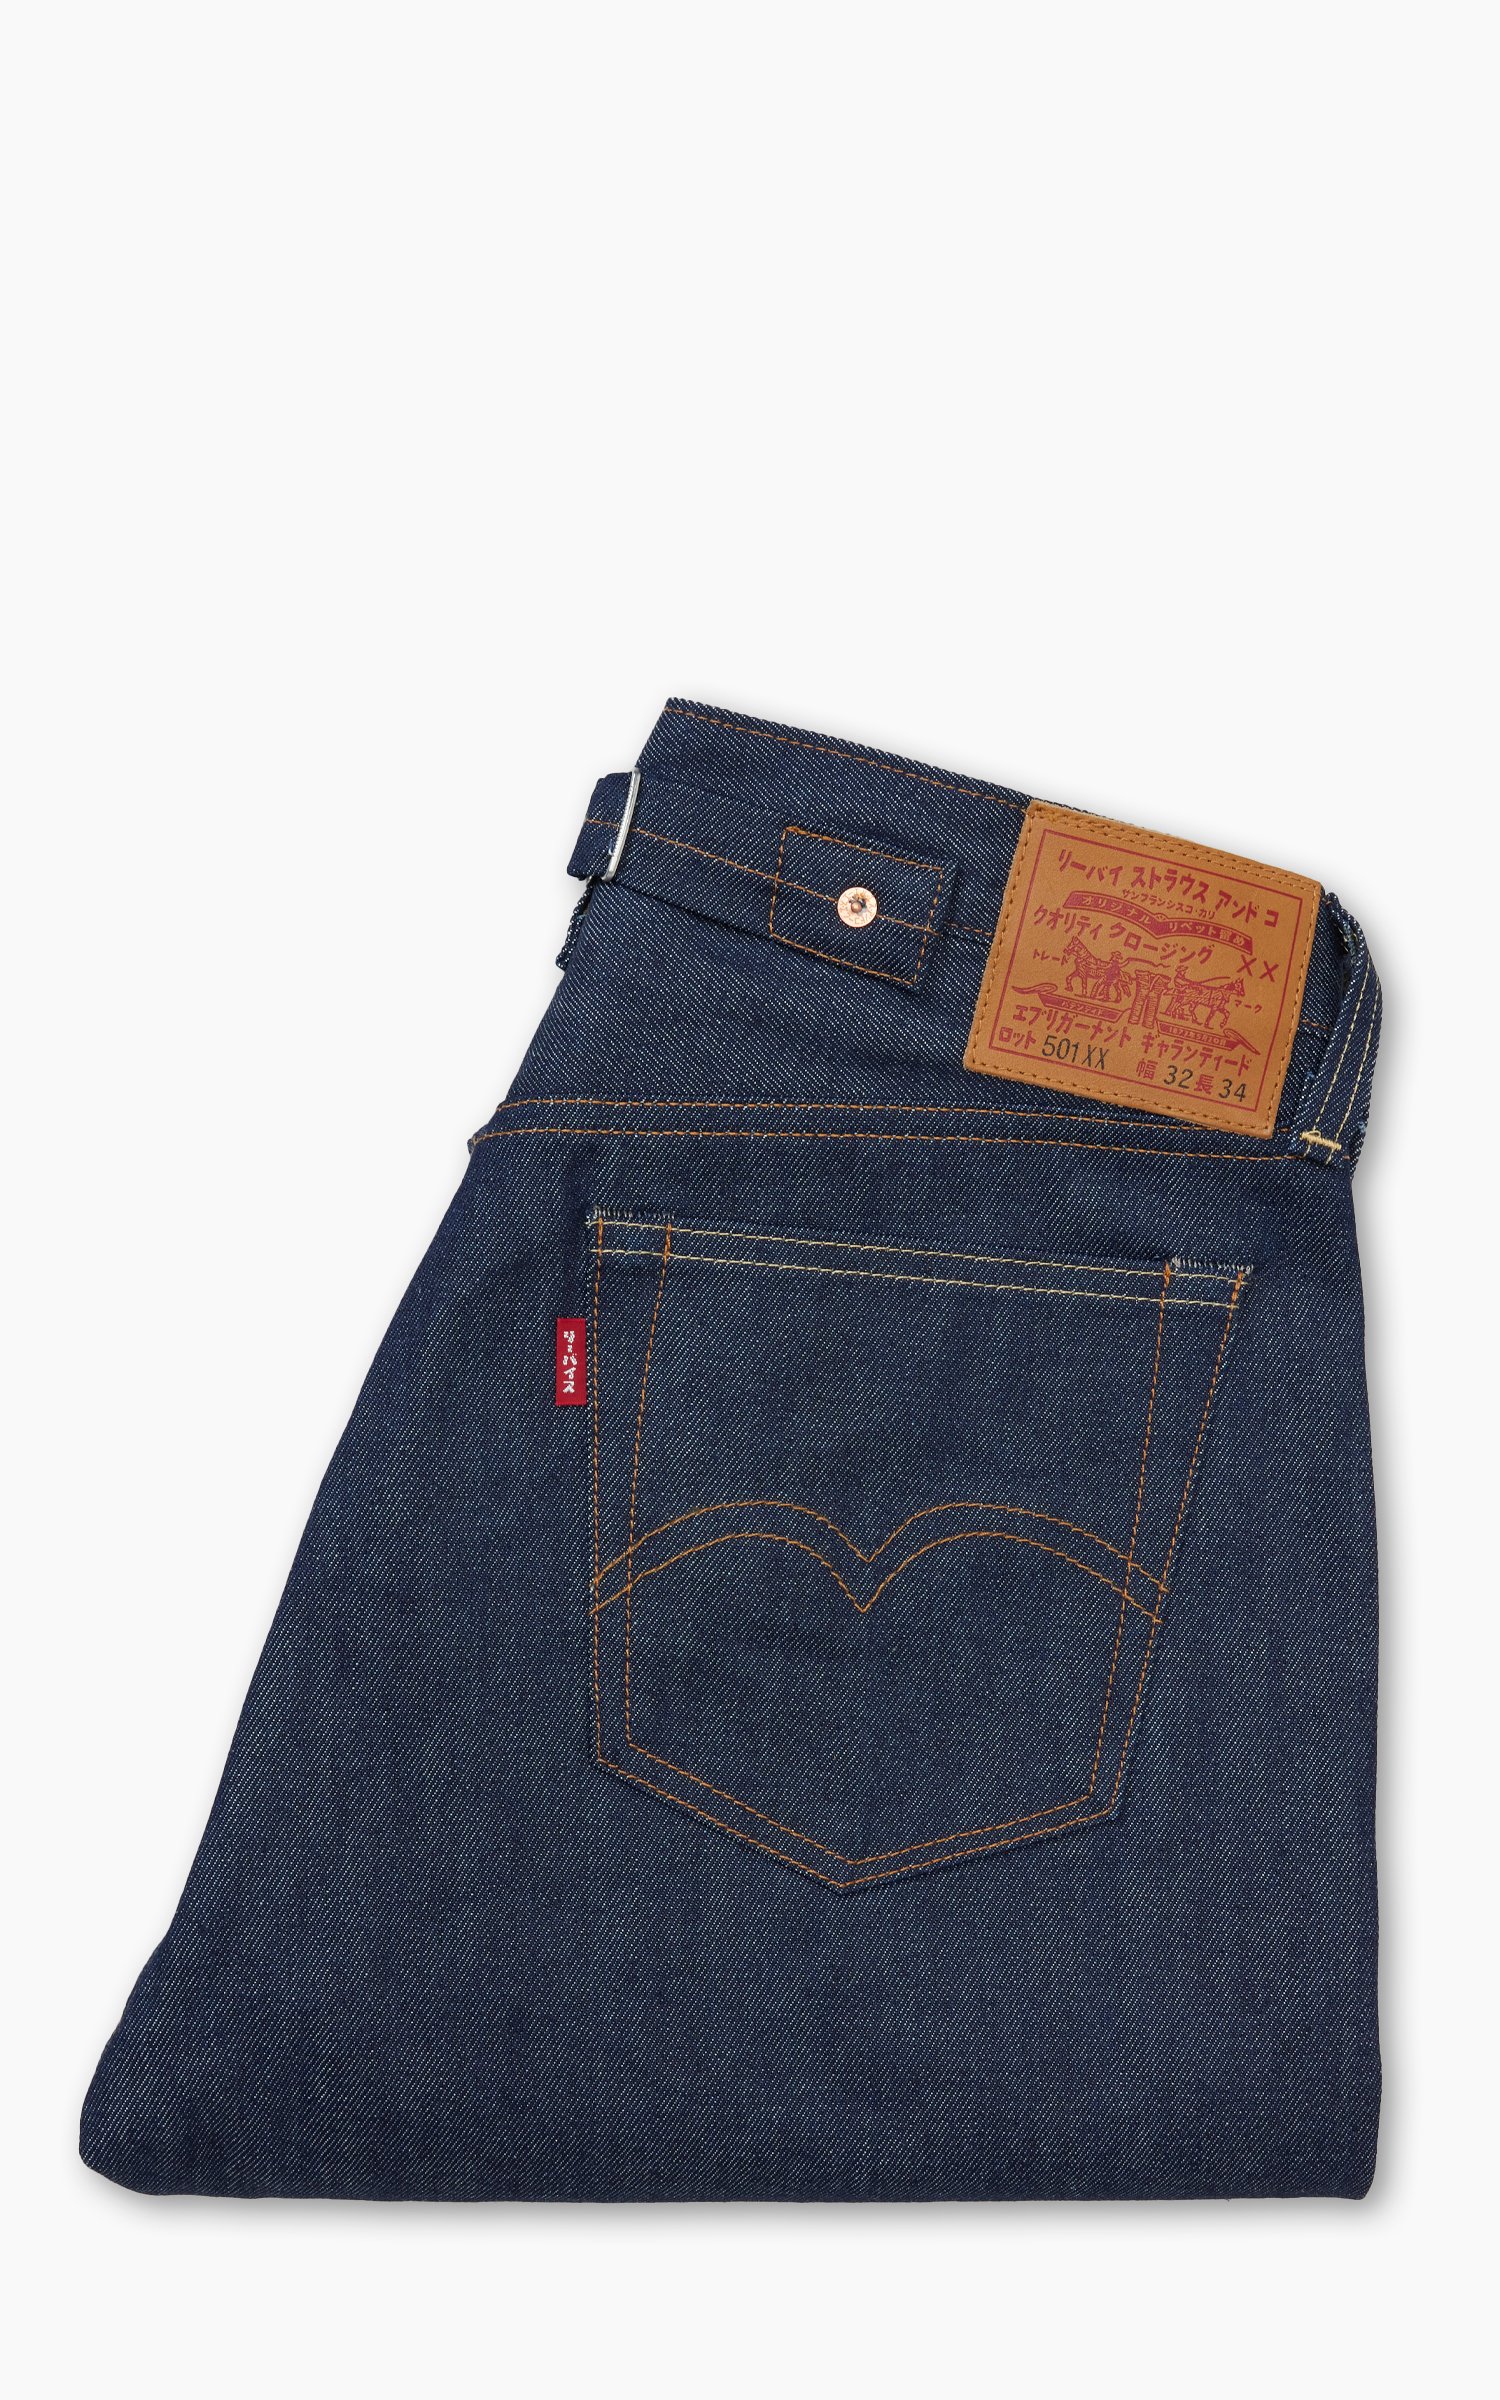 Levi's Newest 501s Pay Tribute to How Jeans Looked Nearly 90 Years